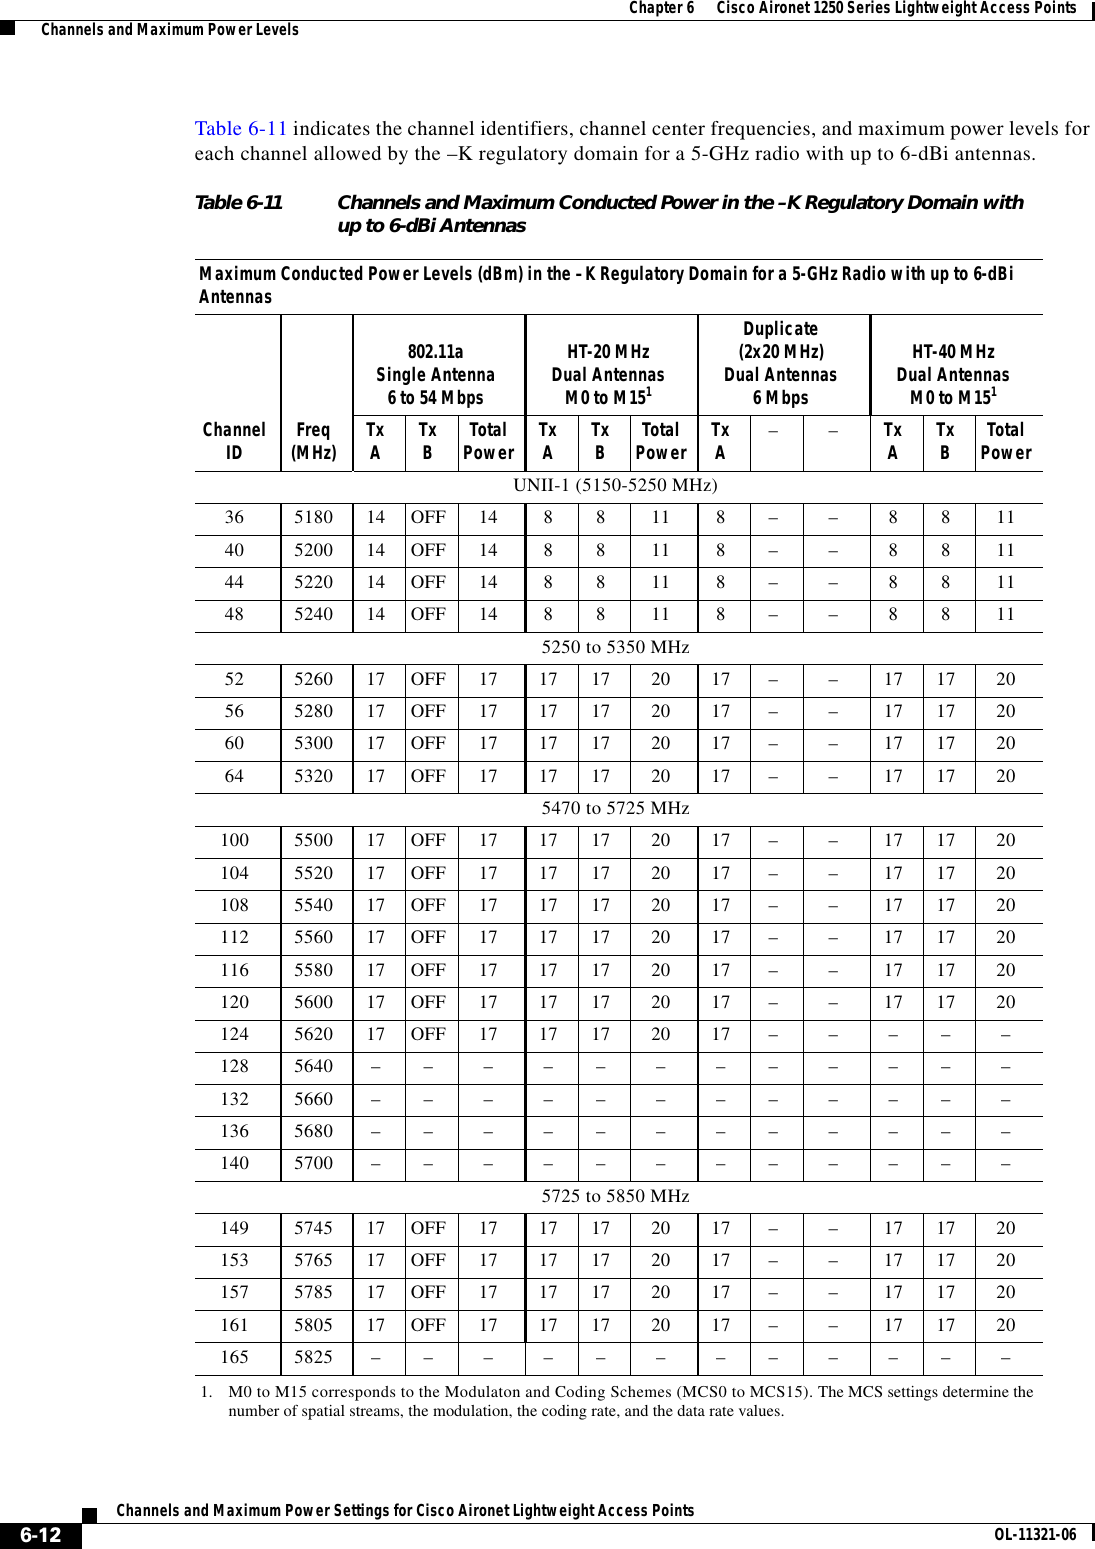  6-12Channels and Maximum Power Settings for Cisco Aironet Lightweight Access Points OL-11321-06Chapter 6      Cisco Aironet 1250 Series Lightweight Access Points  Channels and Maximum Power LevelsTable 6-11 indicates the channel identifiers, channel center frequencies, and maximum power levels for each channel allowed by the –K regulatory domain for a 5-GHz radio with up to 6-dBi antennas.Table 6-11 Channels and Maximum Conducted Power in the –K Regulatory Domain with  up to 6-dBi Antennas Maximum Conducted Power Levels (dBm) in the –K Regulatory Domain for a 5-GHz Radio with up to 6-dBi AntennasChannelID Freq(MHz)802.11aSingle Antenna6 to 54 MbpsHT-20 MHzDual AntennasM0 to M1511. M0 to M15 corresponds to the Modulaton and Coding Schemes (MCS0 to MCS15). The MCS settings determine the number of spatial streams, the modulation, the coding rate, and the data rate values.Duplicate(2x20 MHz)Dual Antennas6 MbpsHT-40 MHzDual AntennasM0 to M151TxATxBTotalPower TxATxBTotalPower TxA––TxATxBTotalPowerUNII-1 (5150-5250 MHz)36 5180  14 OFF 14 8 8 11 8 – – 8 8 1140 5200  14 OFF 14 8 8 11 8 – – 8 8 1144 5220  14 OFF 14 8 8 11 8 – – 8 8 1148 5240  14 OFF 14 8 8 11 8 – – 8 8 115250 to 5350 MHz52 5260  17 OFF 17 17 17 20 17 – – 17 17 2056 5280  17 OFF 17 17 17 20 17 – – 17 17 2060 5300  17 OFF 17 17 17 20 17 – – 17 17 2064 5320  17 OFF 17 17 17 20 17 – – 17 17 205470 to 5725 MHz100 5500 17 OFF 17 17 17 20 17 – – 17 17 20104 5520 17 OFF 17 17 17 20 17 – – 17 17 20108 5540 17 OFF 17 17 17 20 17 – – 17 17 20112 5560 17 OFF 17 17 17 20 17 – – 17 17 20116 5580 17 OFF 17 17 17 20 17 – – 17 17 20120 5600 17 OFF 17 17 17 20 17 – – 17 17 20124 5620 17 OFF 17 17 17 20 17 – – – – –128 5640 – – – – – – – – – – – –132 5660 – – – – – – – – – – – –136 5680 – – – – – – – – – – – –140 5700 – – – – – – – – – – – –5725 to 5850 MHz149 5745 17 OFF 17 17 17 20 17 – – 17 17 20153 5765 17 OFF 17 17 17 20 17 – – 17 17 20157 5785 17 OFF 17 17 17 20 17 – – 17 17 20161 5805 17 OFF 17 17 17 20 17 – – 17 17 20165 5825 – – – – – – – – – – – –